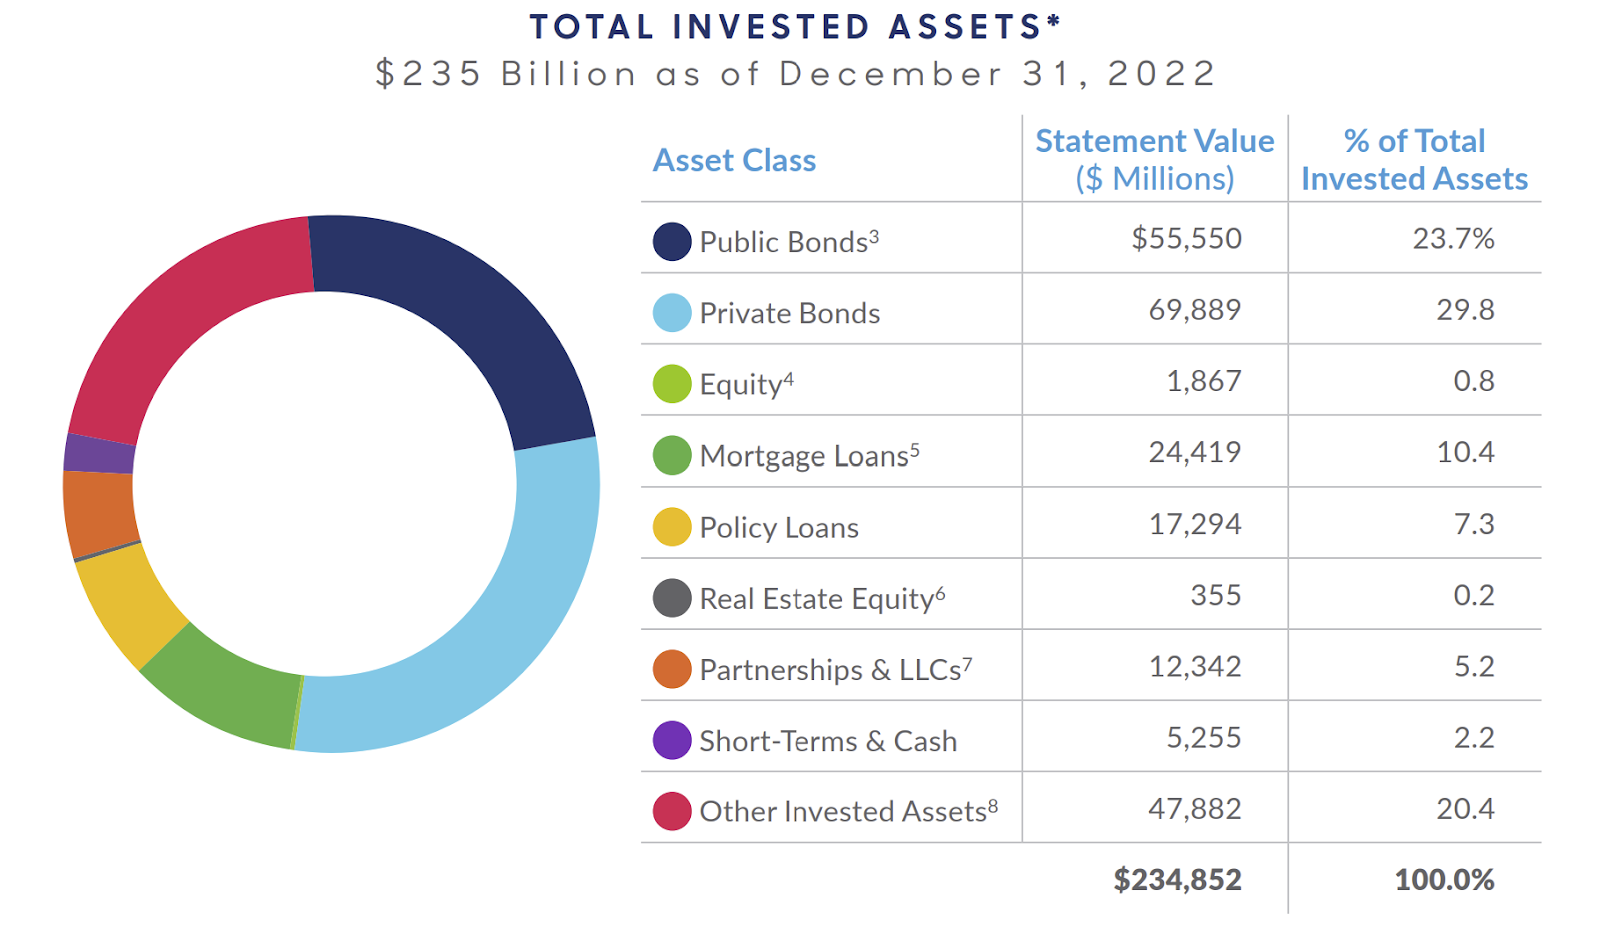 MassMutual’s Total Invested Assets as of December 31, 2022.